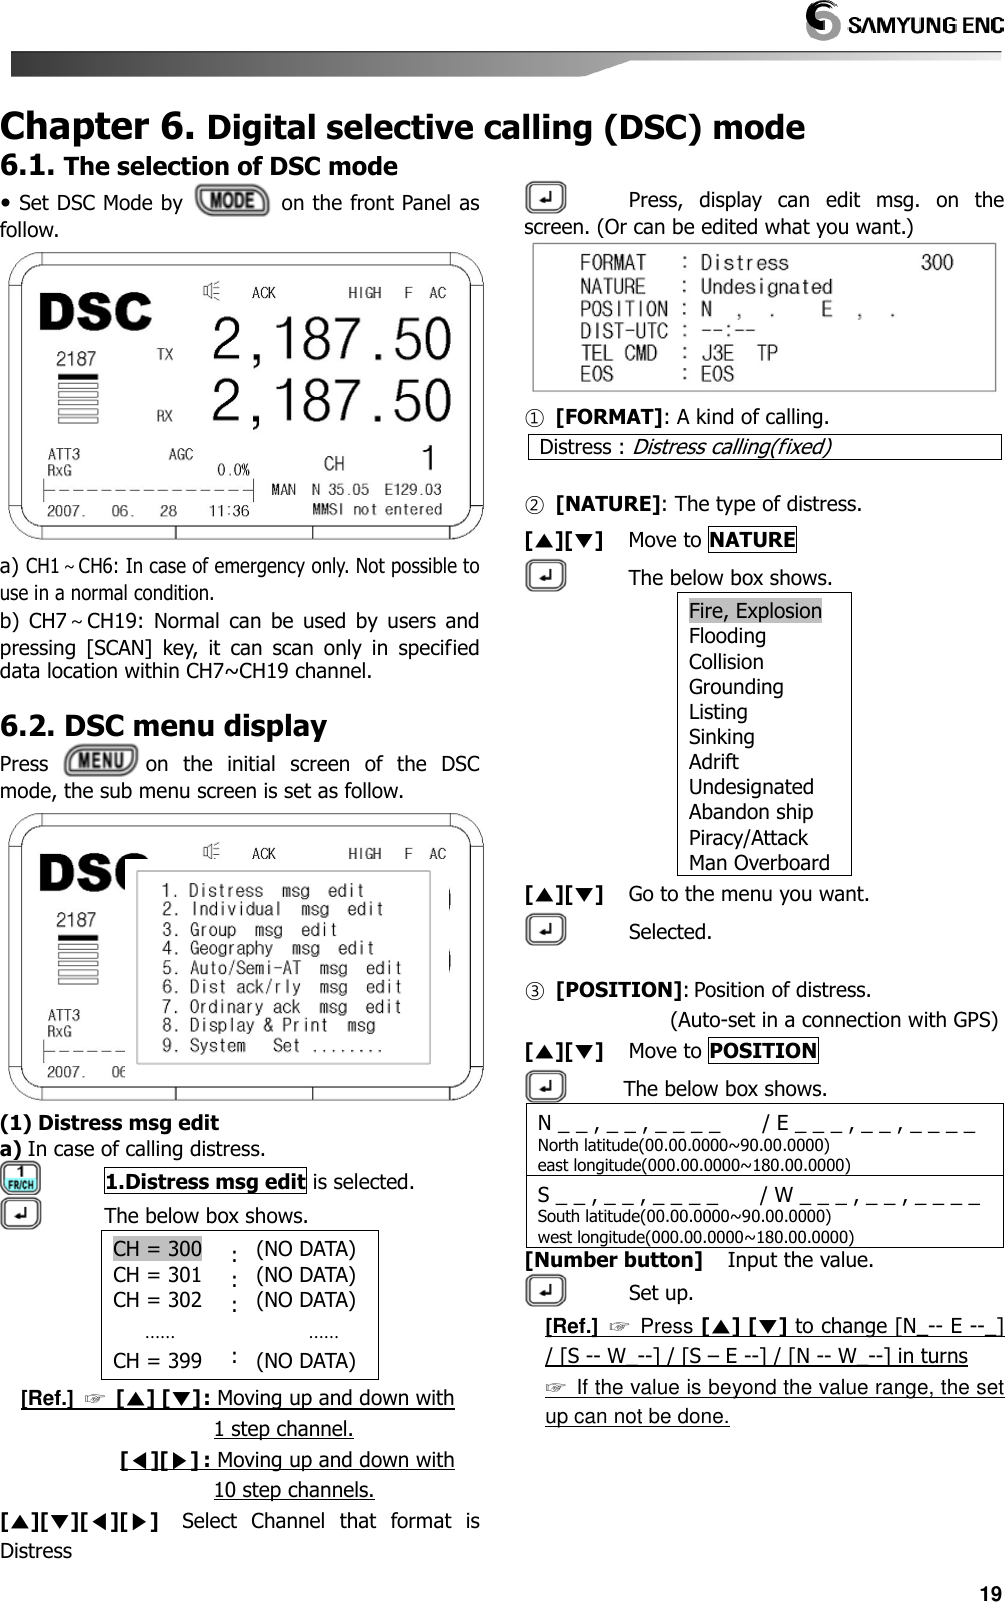   19 Chapter 6. Digital selective calling (DSC) mode 6.1. The selection of DSC mode  Set DSC Mode by    on the front Panel as follow.  a) CH1～CH6: In case of emergency only. Not possible to use in a normal condition. b)  CH7～CH19:  Normal  can  be  used  by  users  and pressing  [SCAN]  key,  it  can  scan  only  in  specified data location within CH7~CH19 channel.  6.2. DSC menu display Press  on  the  initial  screen  of  the  DSC mode, the sub menu screen is set as follow.  (1) Distress msg edit   a) In case of calling distress.             1.Distress msg edit is selected.             The below box shows. CH = 300 CH = 301 CH = 302    …… CH = 399 : : :  : (NO DATA) (NO DATA) (NO DATA)      …… (NO DATA) [Ref.]  ☞ [▲] [▼] : Moving up and down with 1 step channel. [◀][▶] : Moving up and down with 10 step channels. [▲][▼][◀][▶]     Select  Channel  that  format  is Distress              Press,  display  can  edit  msg.  on  the screen. (Or can be edited what you want.)  ① [FORMAT]: A kind of calling. Distress : Distress calling(fixed)  ② [NATURE]: The type of distress. [▲][▼]     Move to NATURE             The below box shows. Fire, Explosion    Flooding              Collision              Grounding          Listing                  Sinking                Adrift                    Undesignated    Abandon ship    Piracy/Attack      Man Overboard  [▲][▼]     Go to the menu you want.             Selected.  ③ [POSITION]: Position of distress. (Auto-set in a connection with GPS) [▲][▼]     Move to POSITION            The below box shows. N _ _ , _ _ , _ _ _ _        / E _ _ _ , _ _ , _ _ _ _ North latitude(00.00.0000~90.00.0000) east longitude(000.00.0000~180.00.0000) S _ _ , _ _ , _ _ _ _        / W _ _ _ , _ _ , _ _ _ _ South latitude(00.00.0000~90.00.0000)                 west longitude(000.00.0000~180.00.0000) [Number button]     Input the value.             Set up. [Ref.]  ☞ Press [▲] [▼] to change [N_-- E --_] / [S -- W_--] / [S – E --] / [N -- W_--] in turns ☞ If the value is beyond the value range, the set up can not be done.   